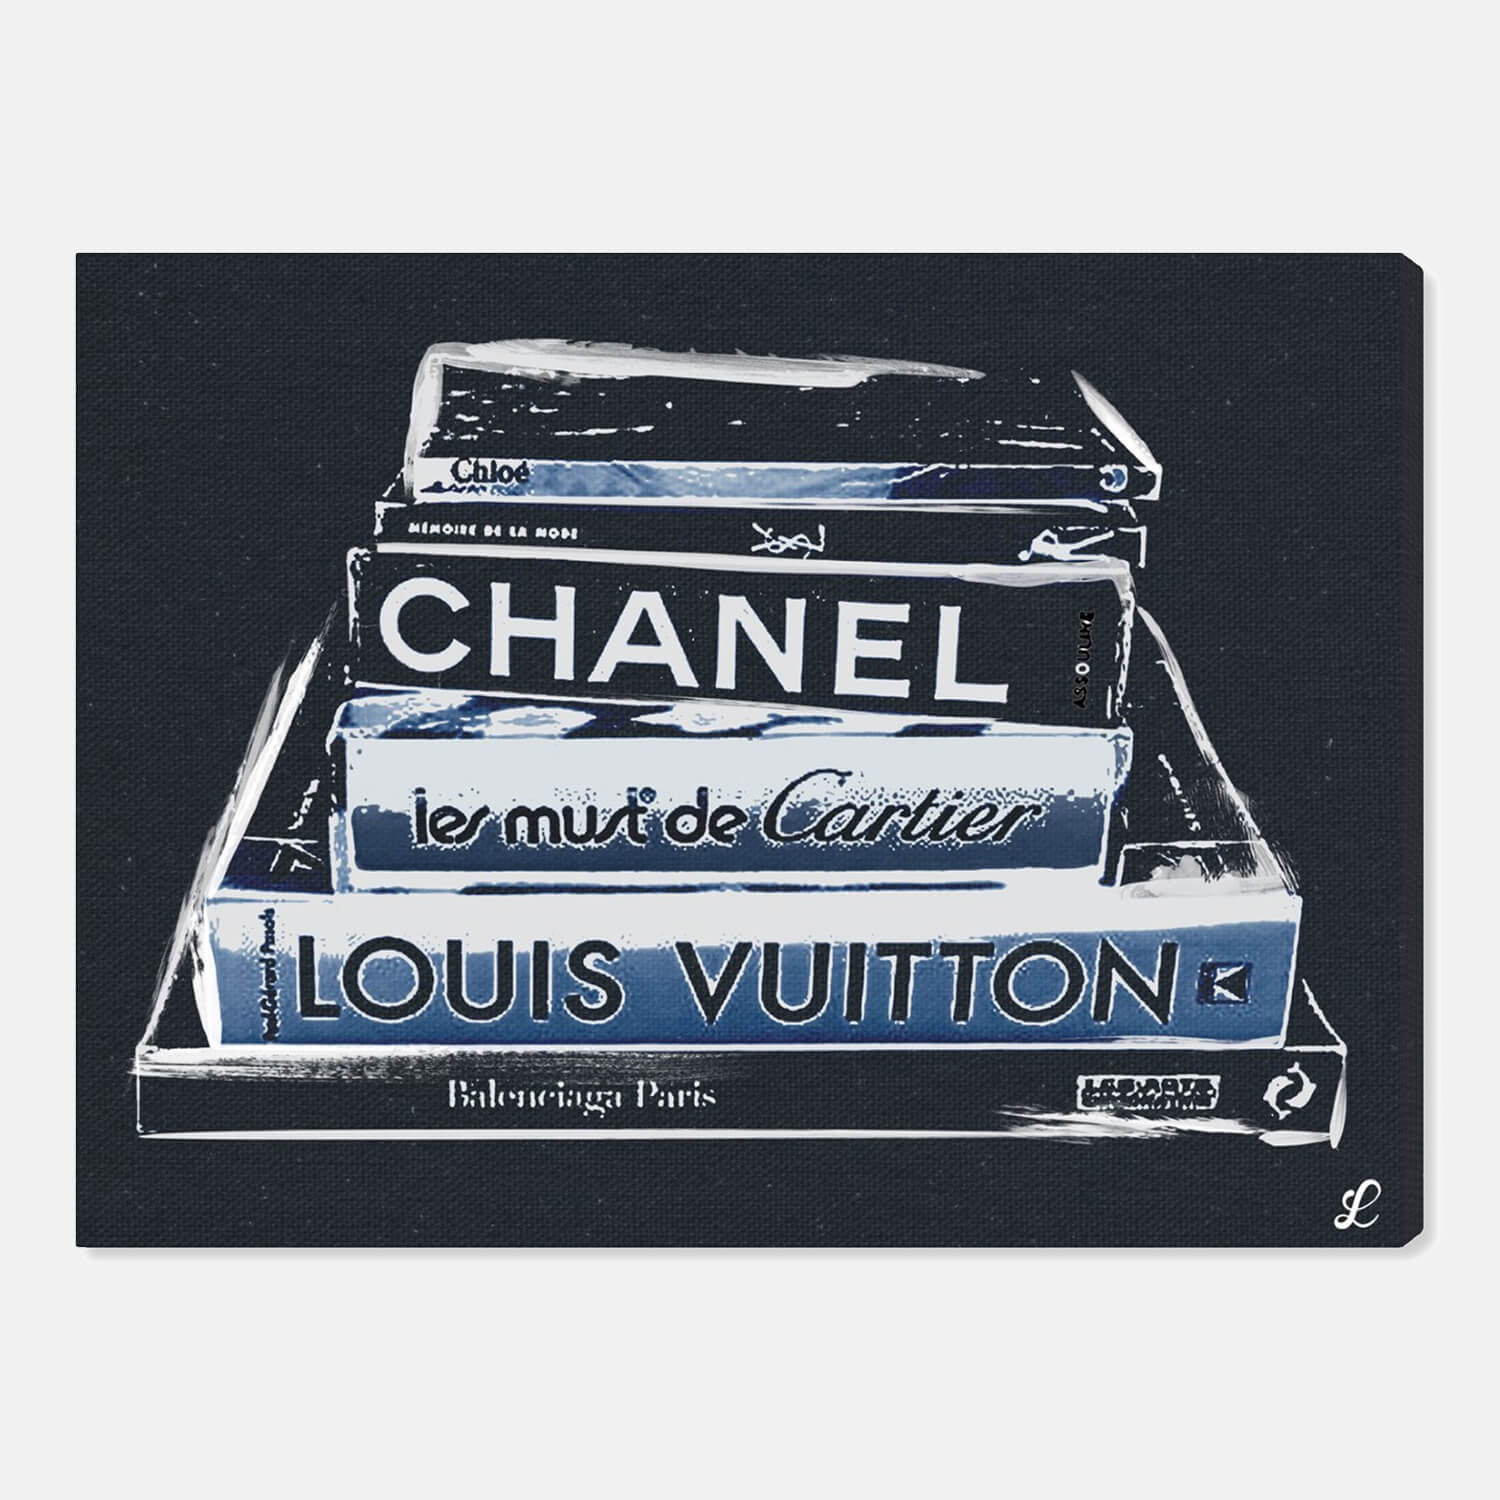 Oliver Gal, Wall Decor, Oliver Gal Louis Vuitton Picture